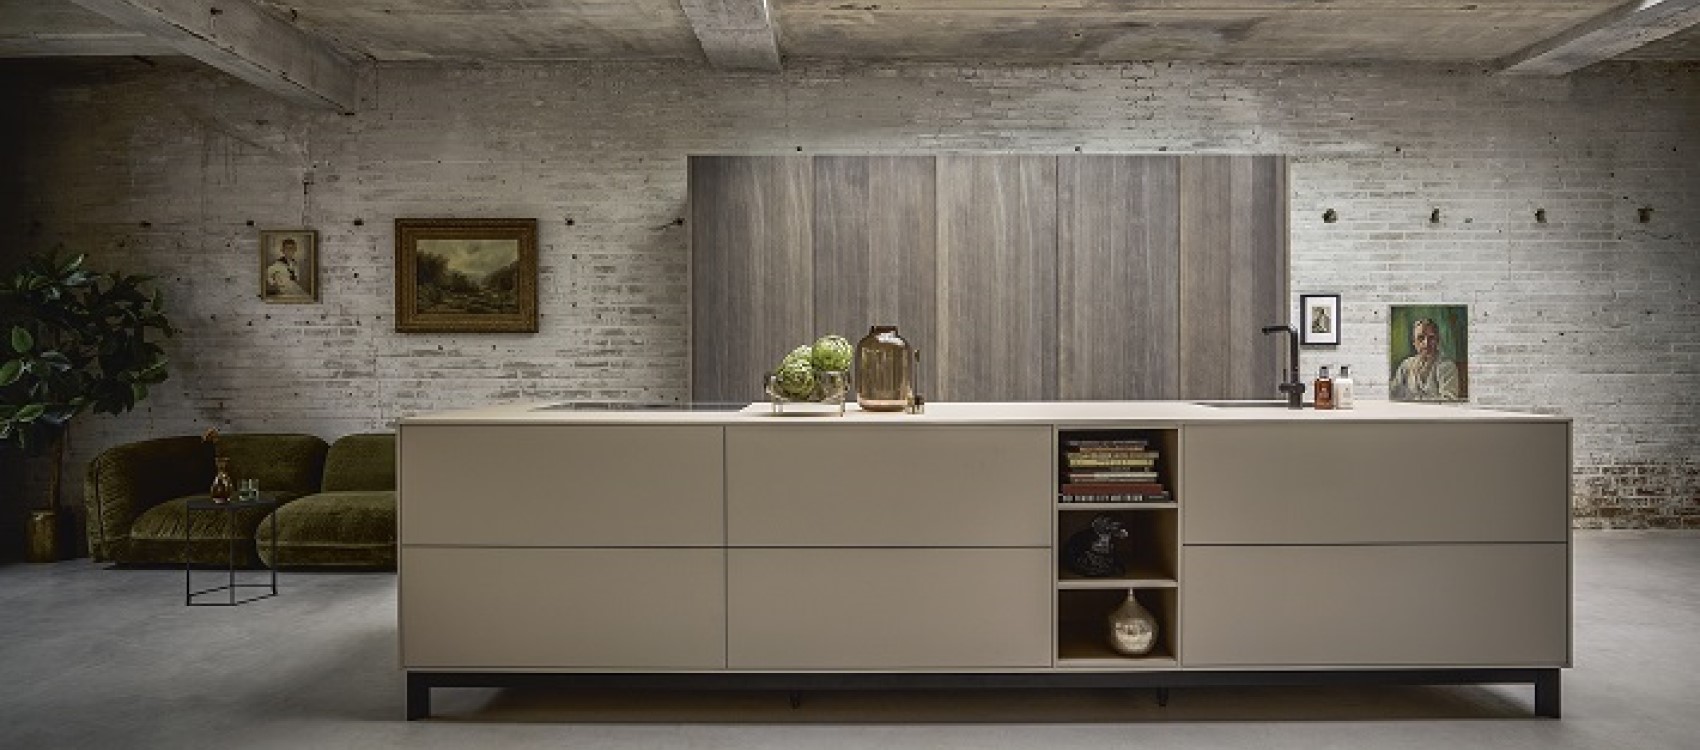 Modern kitchen by Next 125 with Sahara Grey lacquer and Pearl Grey Oak finishes, with tall folding doors to hide units and metal frame on island instead of plinth